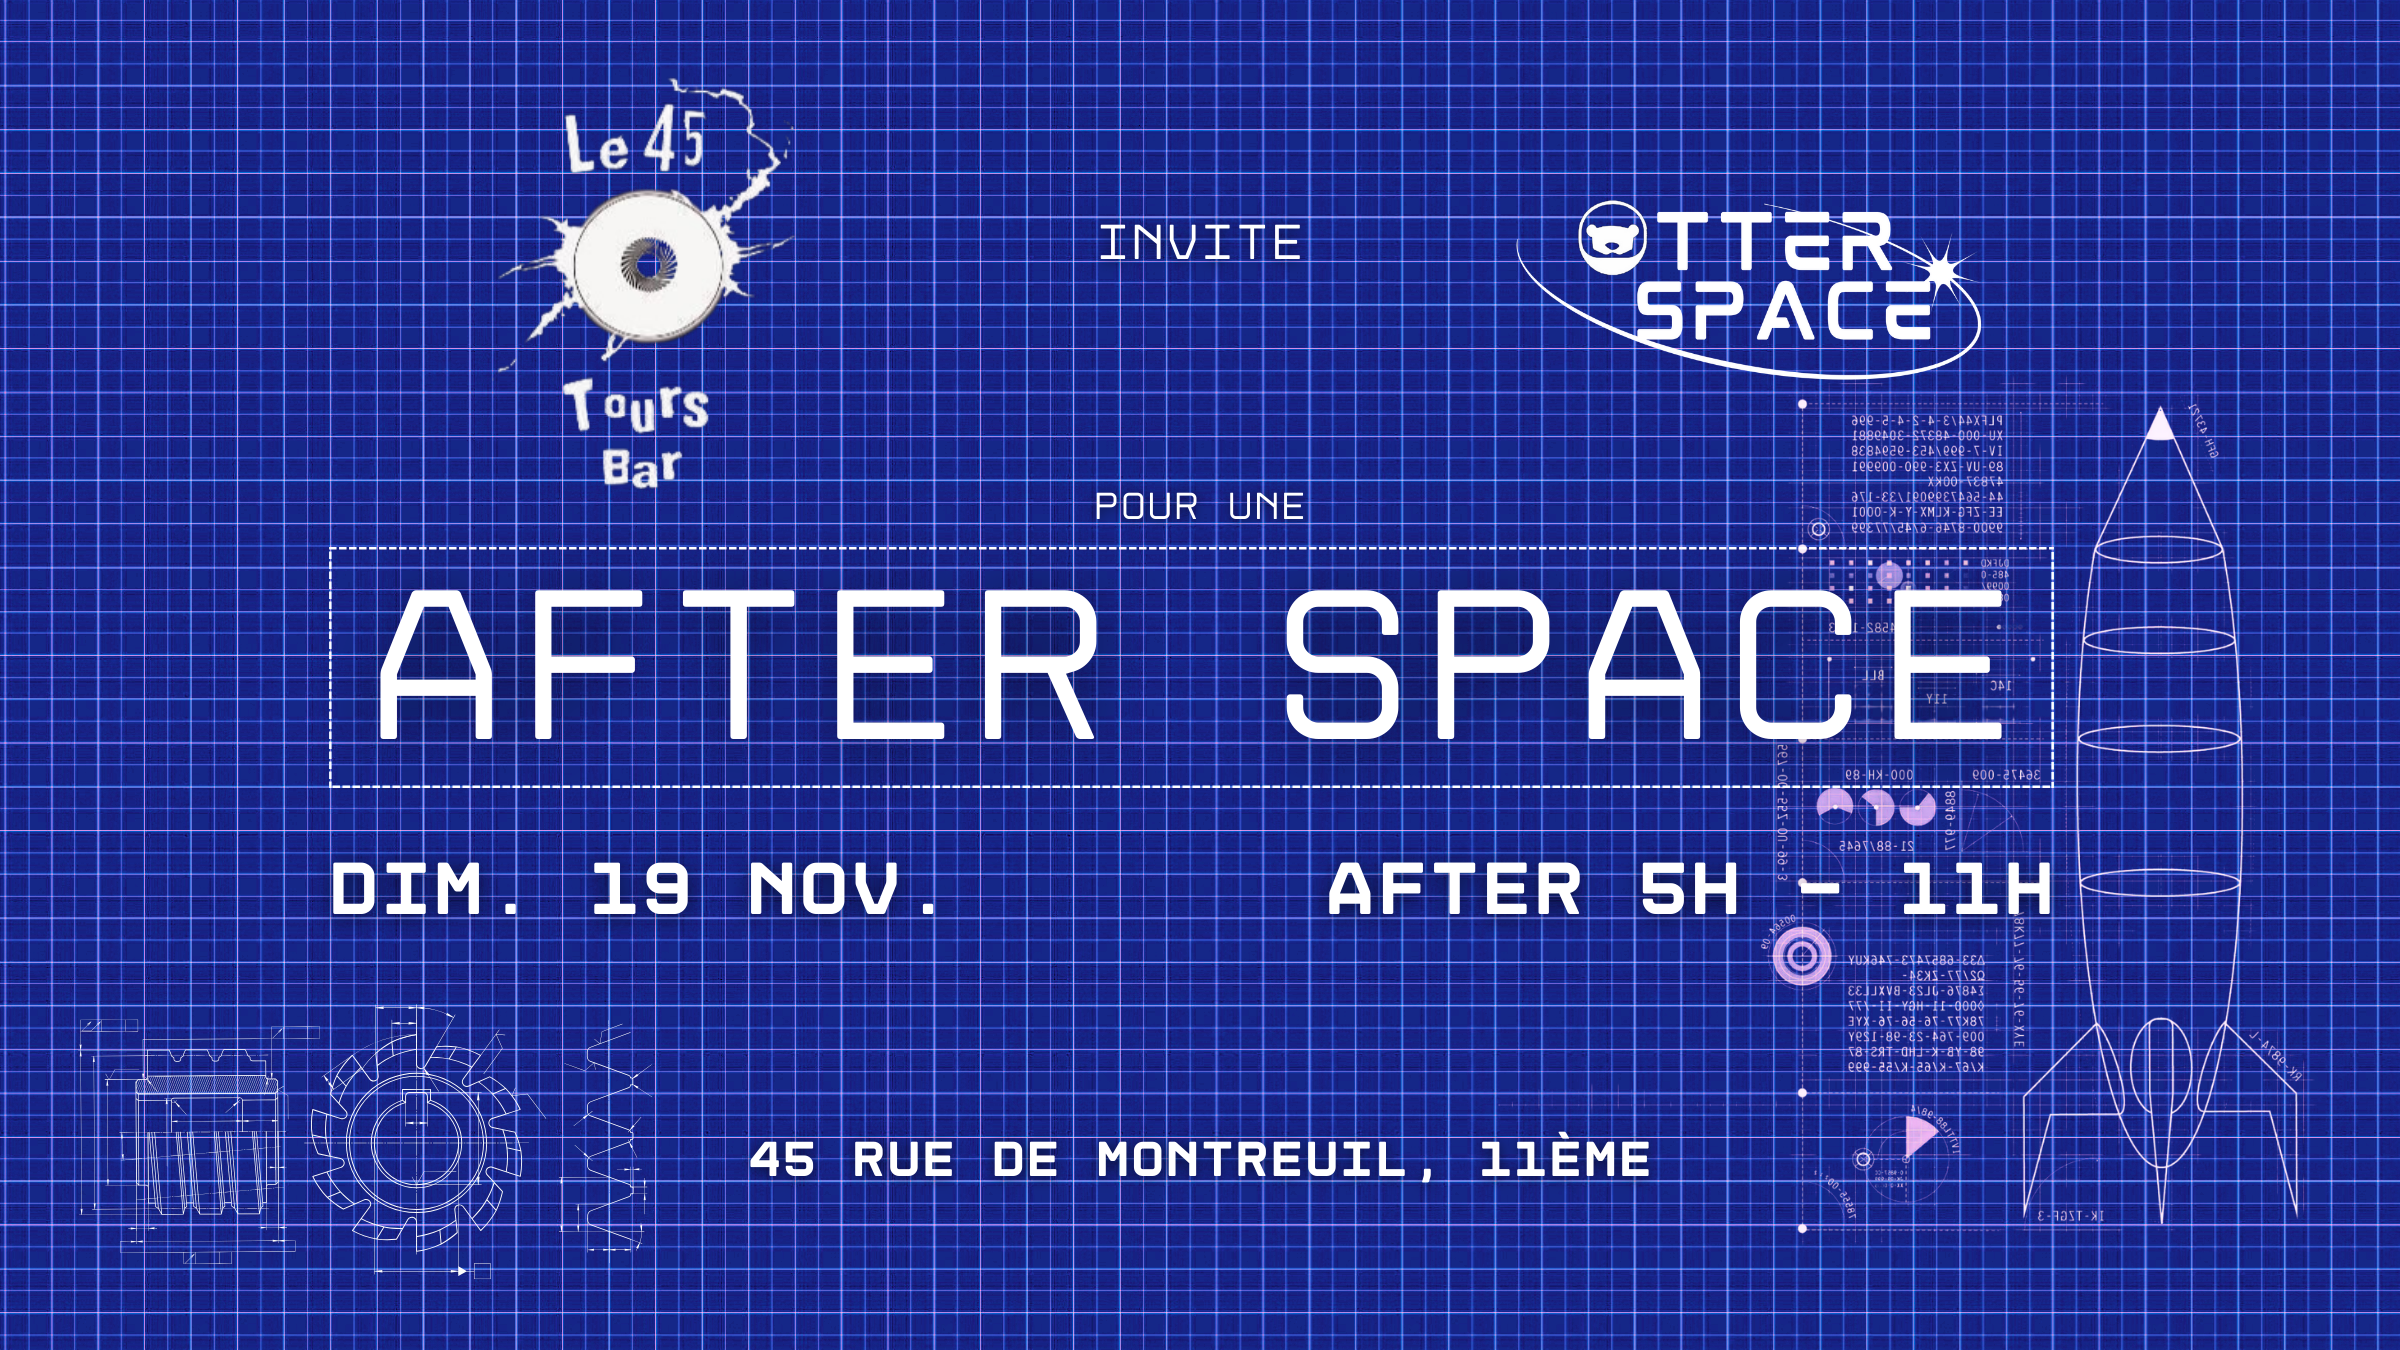 AFTER Techno L'Atome #379 with Otter Space Collective - フライヤー表